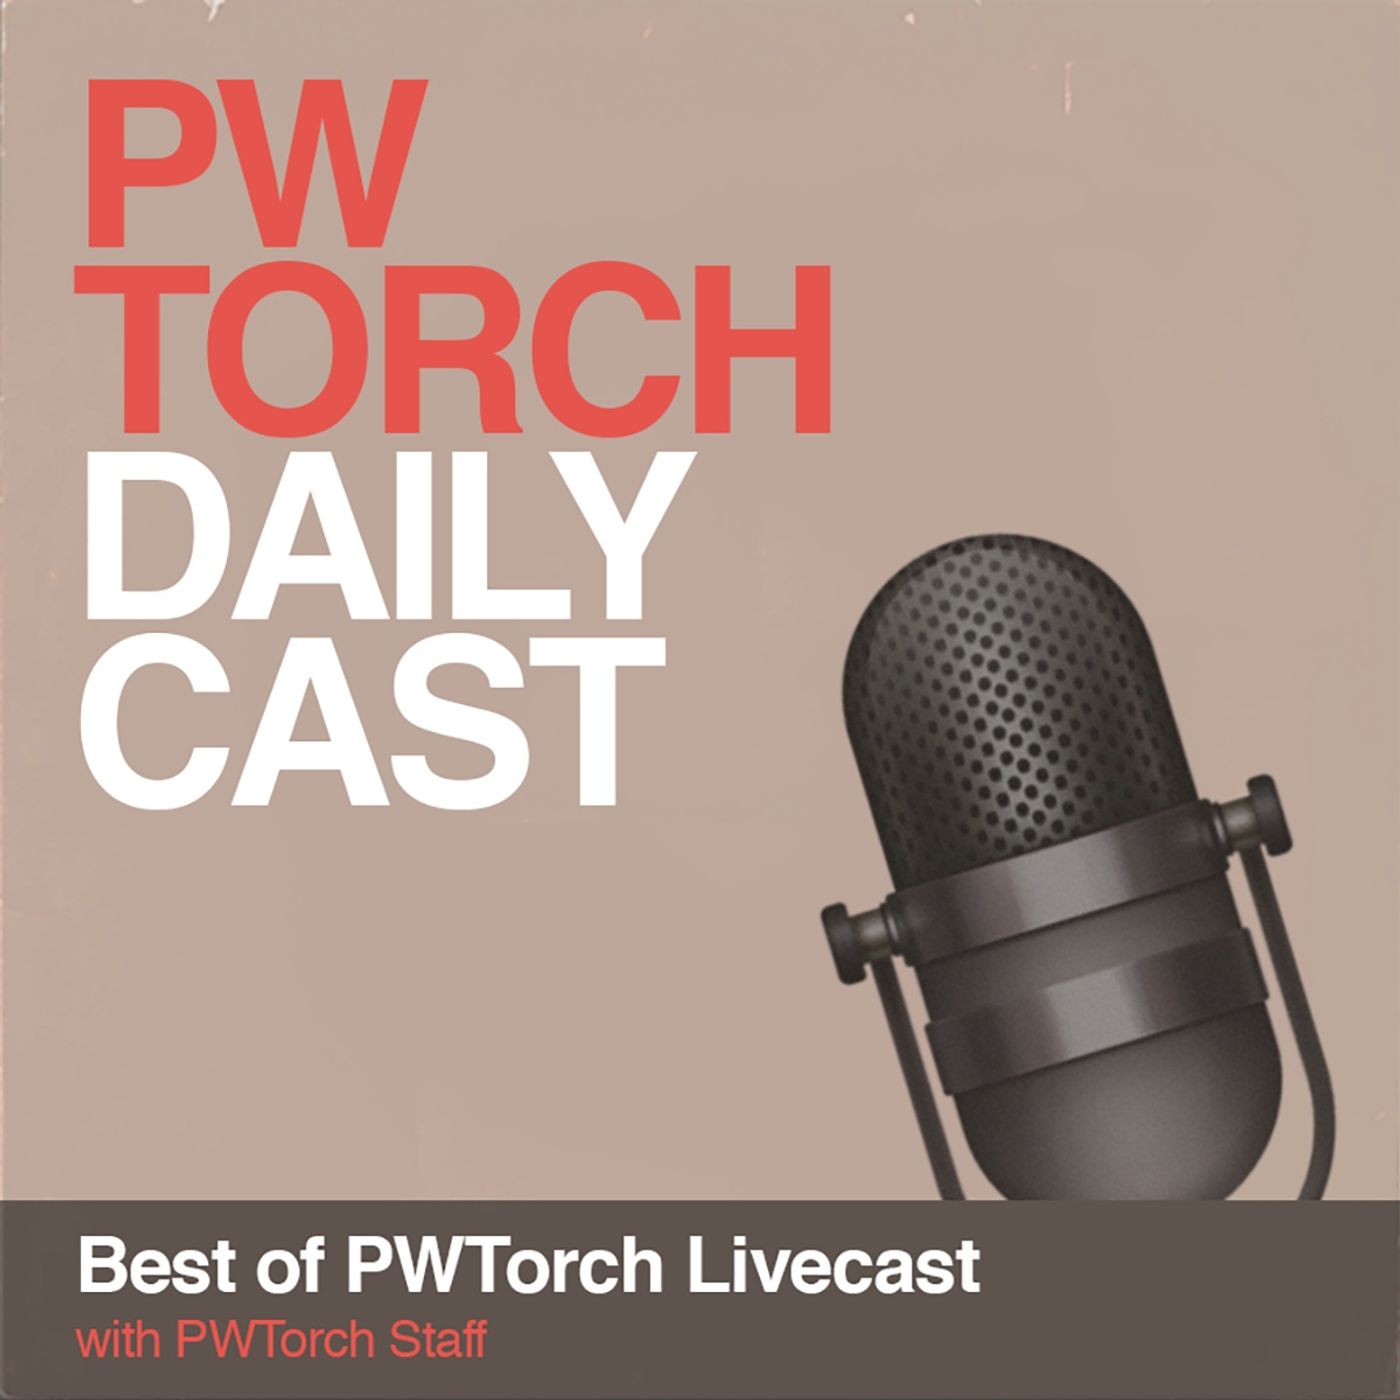 Best of PWTorch Livecast - (4-6-2014) WrestleMania 30 post-show incl. instant reaction to Undertaker’s streak ending, Bryan’s WWE Title win